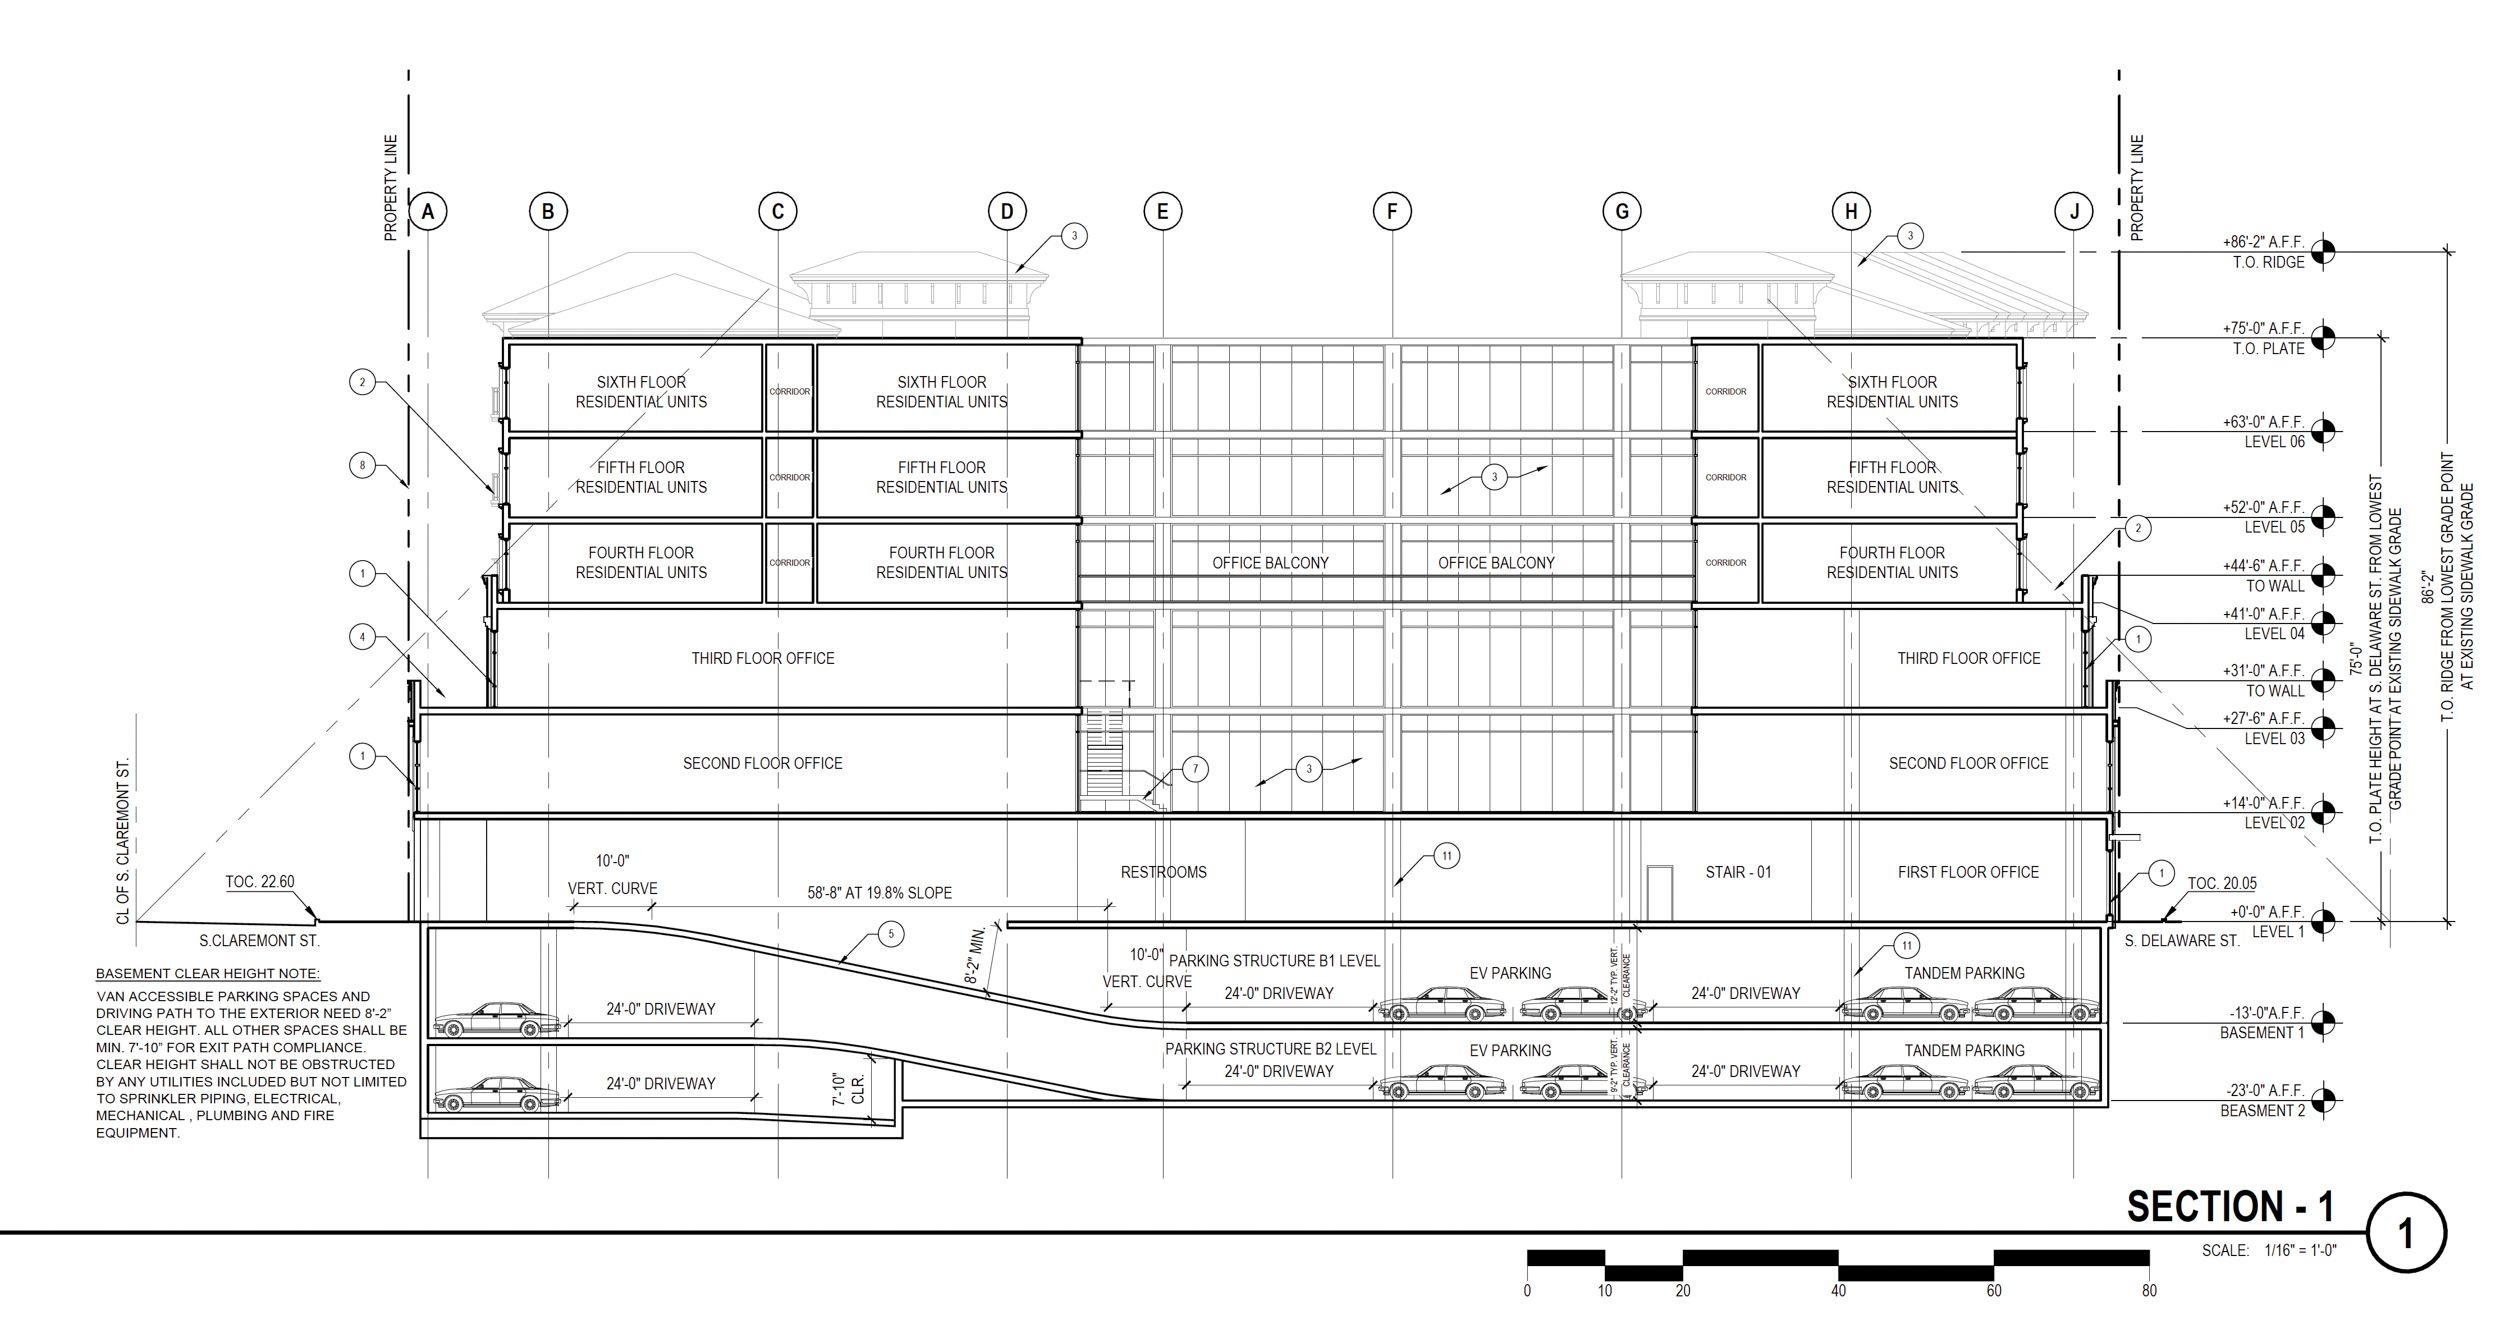 500 East 4th Avenue vertical cross-section, illustration by ARC TEC Inc